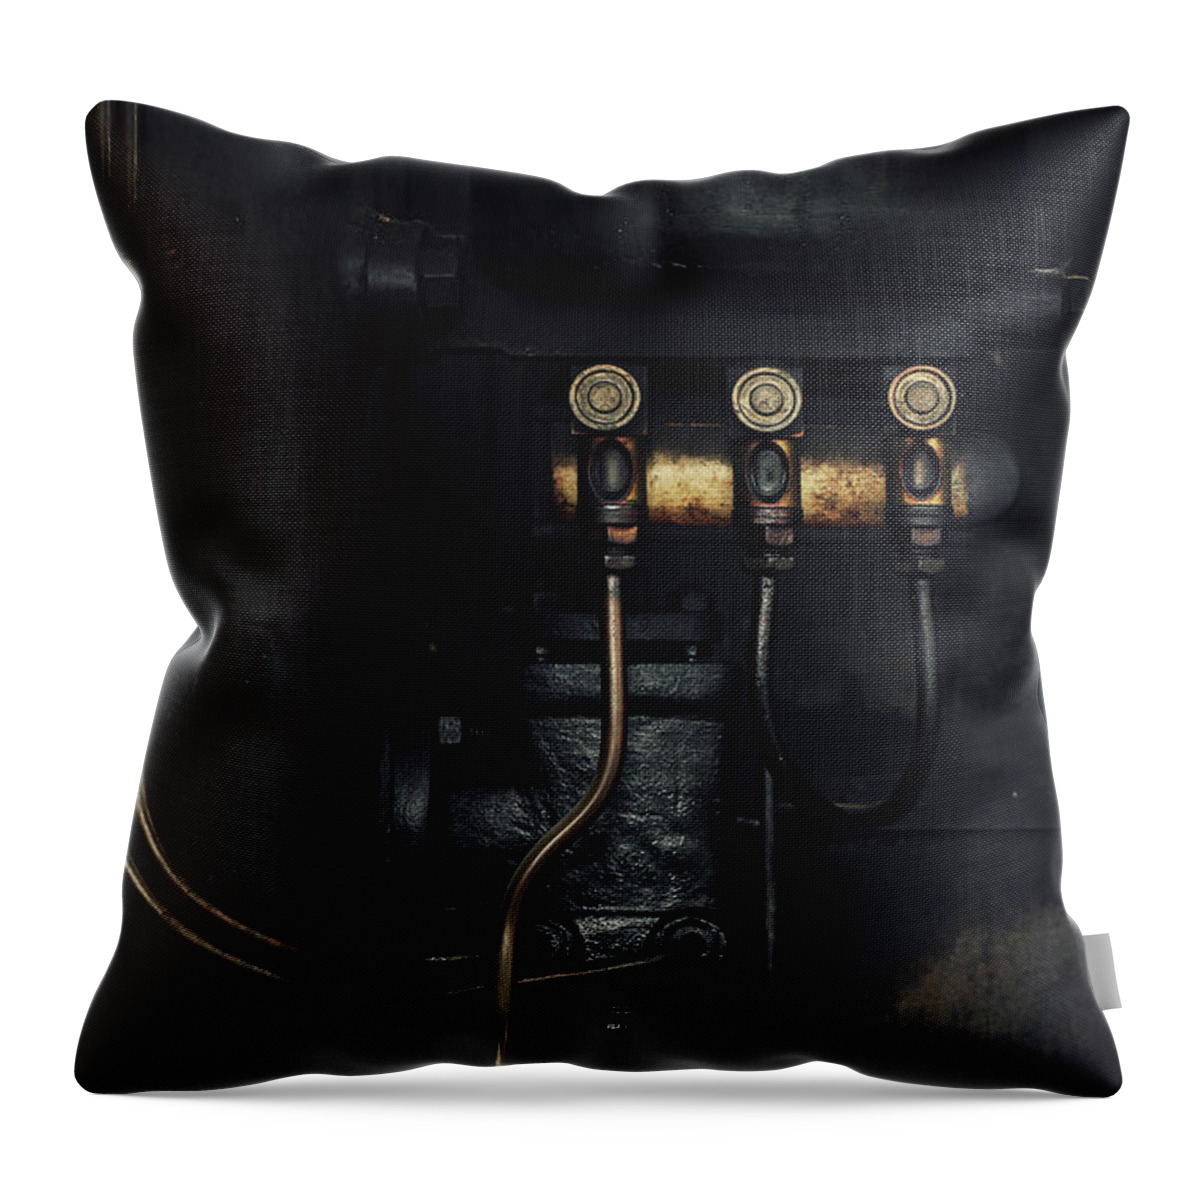 Black Throw Pillow featuring the photograph Link by Zoltan Toth